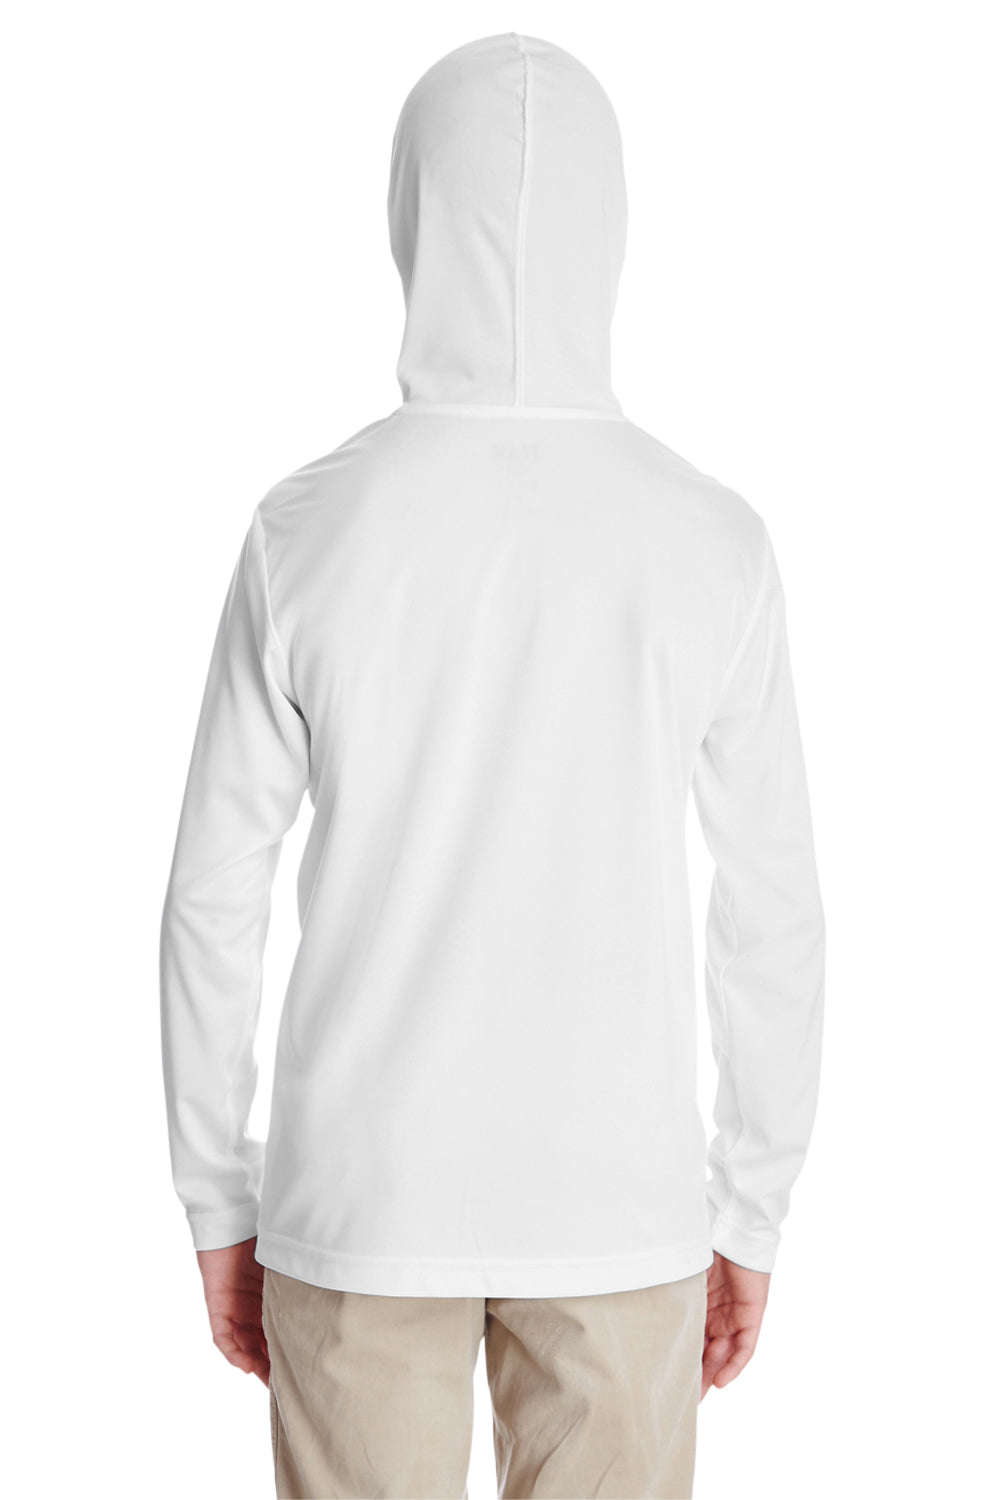 Team 365 TT41Y Youth Zone Performance Moisture Wicking Long Sleeve Hooded T-Shirt Hoodie White Back